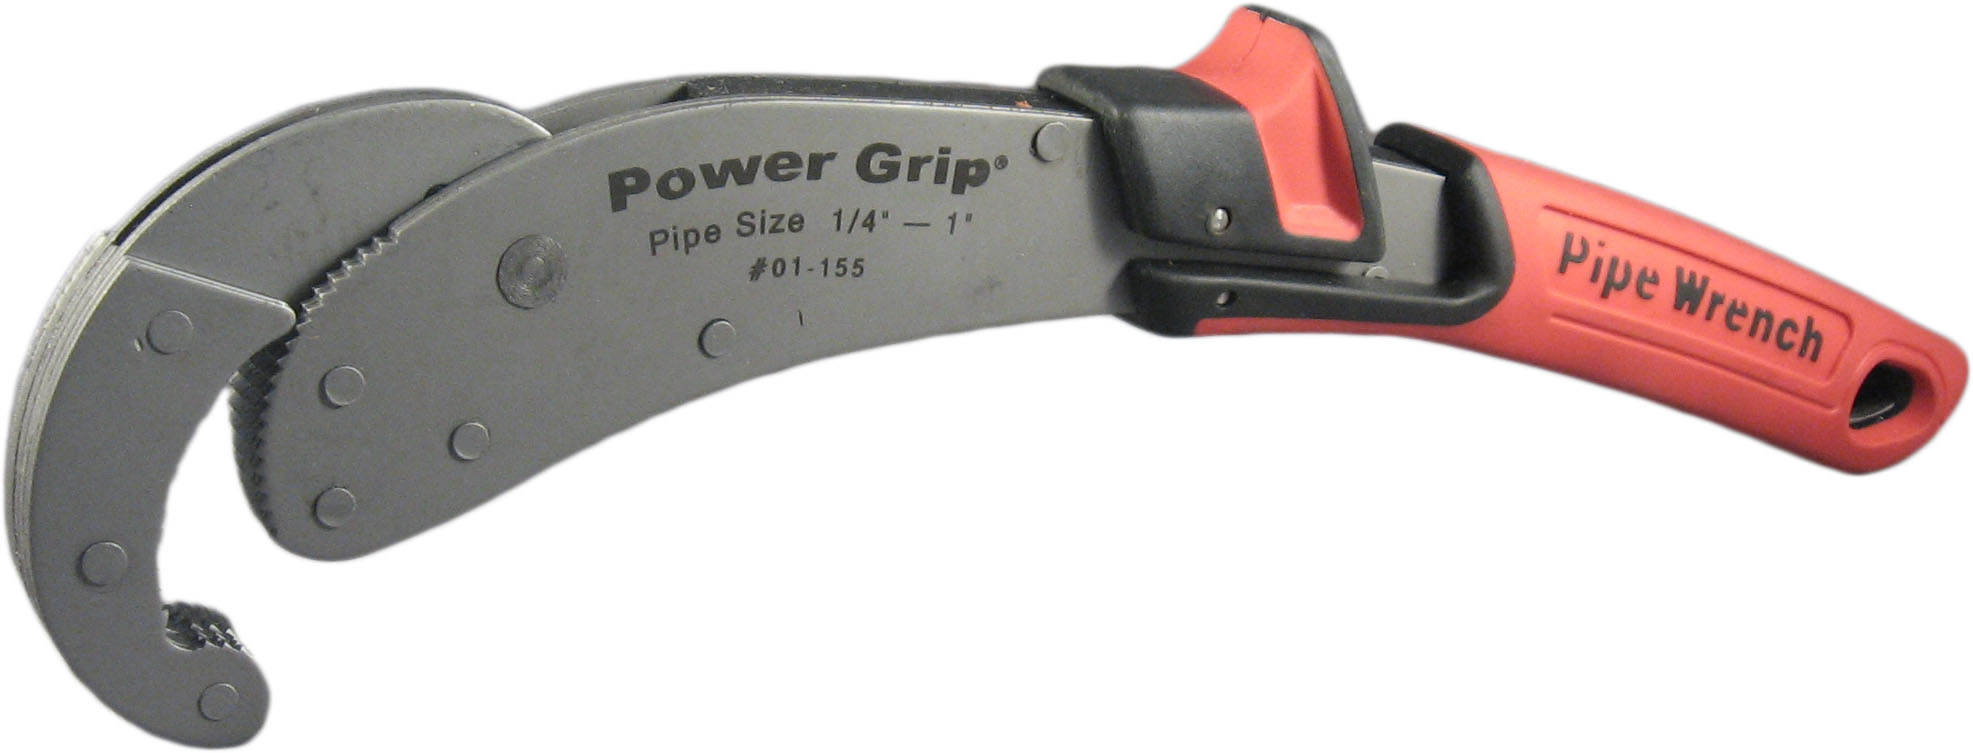 Self adjustable pipe wrench